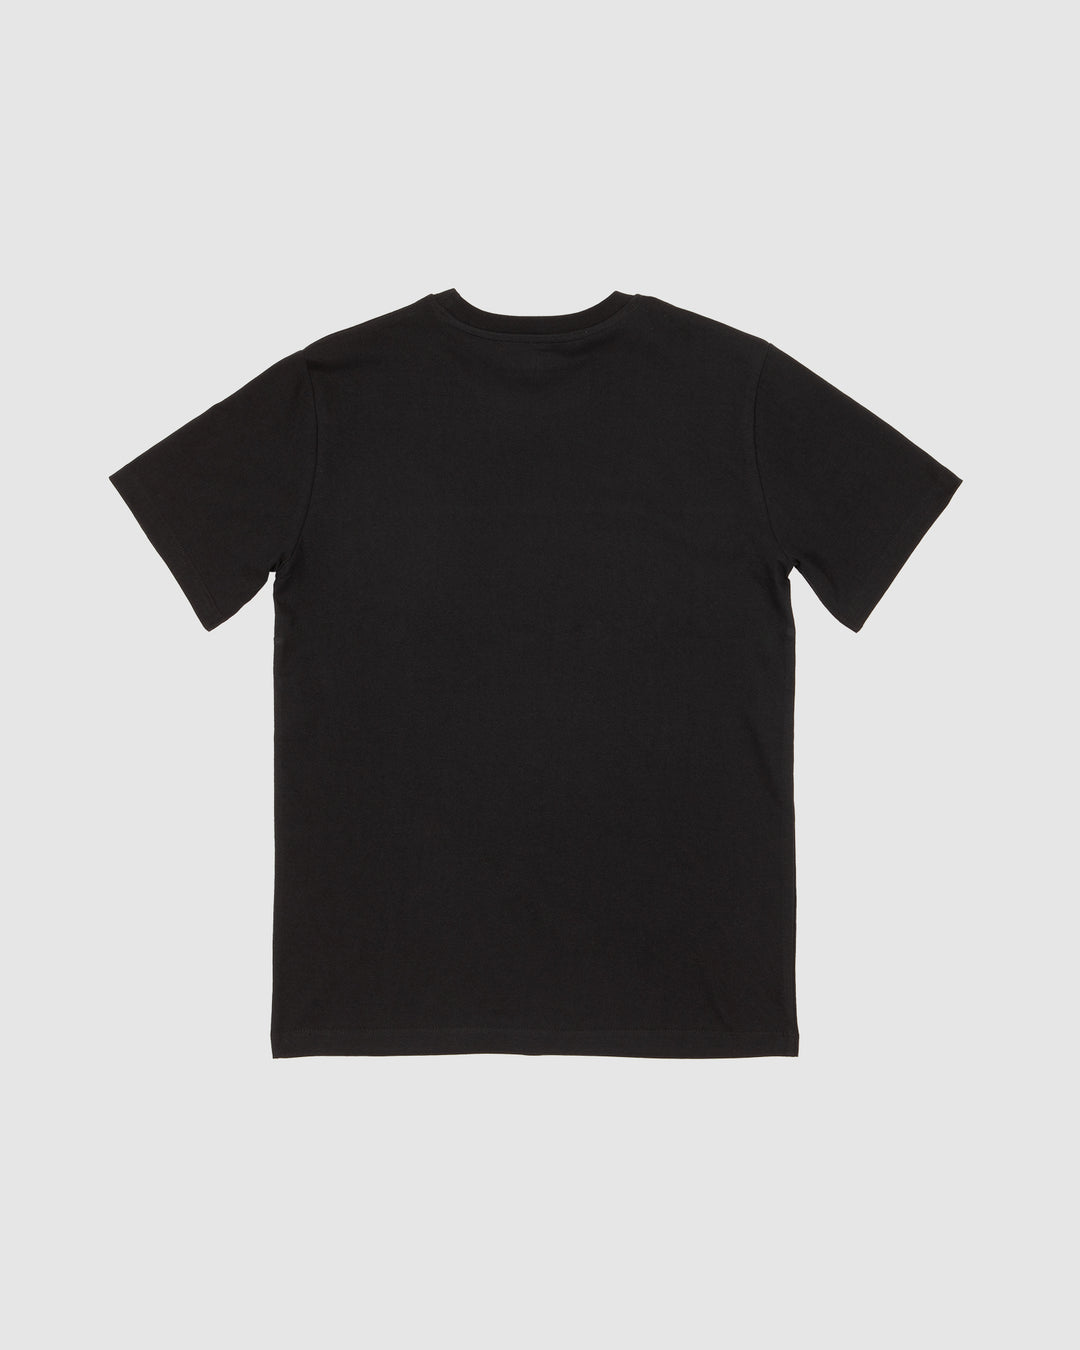 UNIT Roots Youth Tee